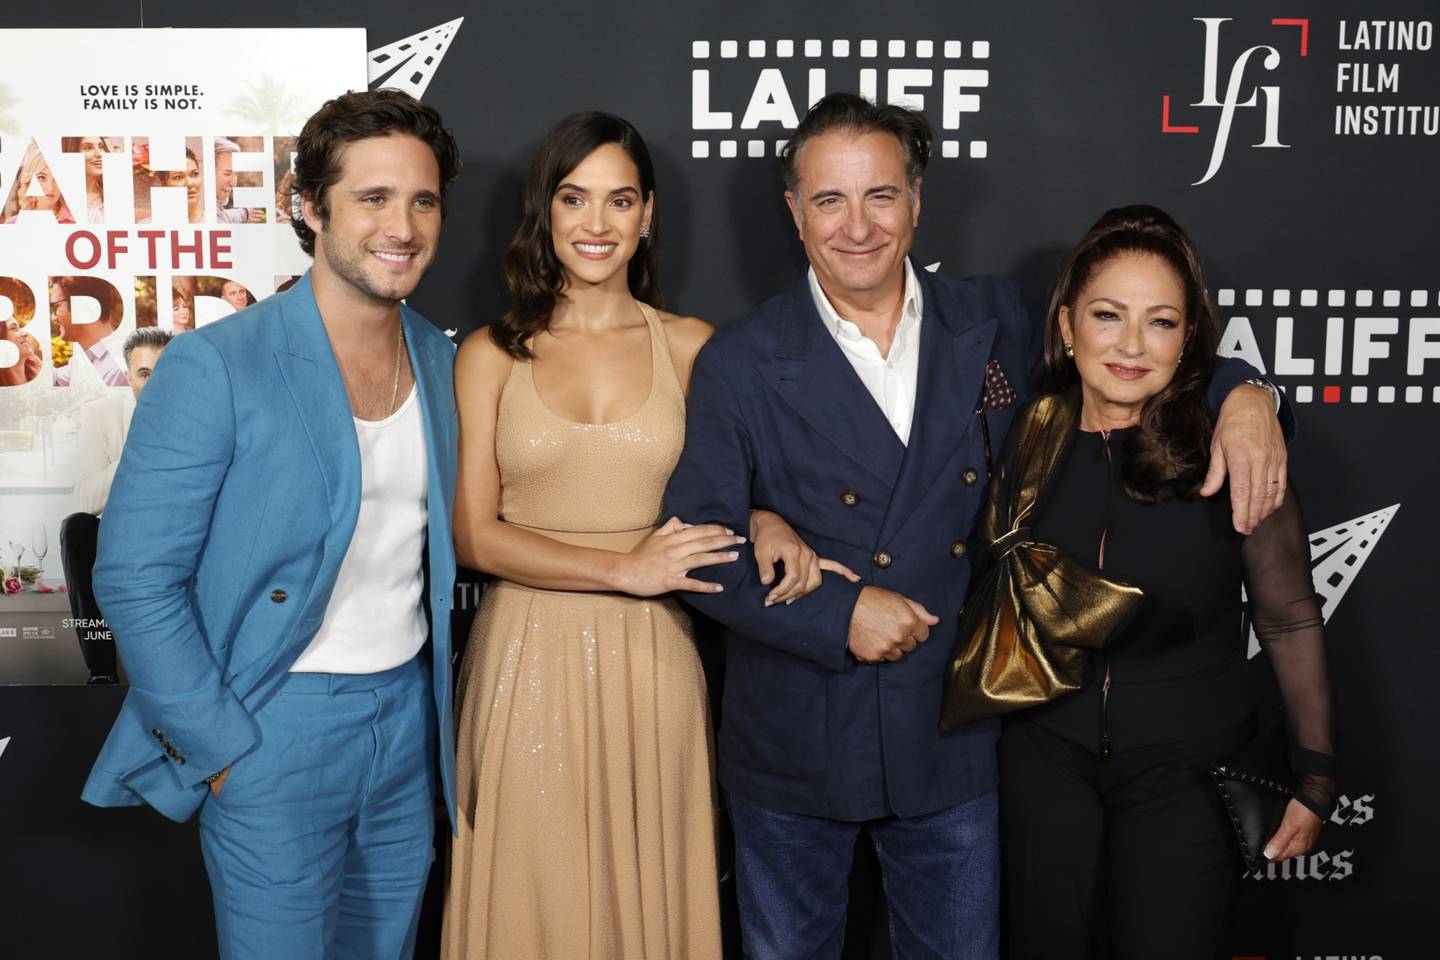 (L-R) Diego Boneta, Adria Arjona, Andy Garcia, Gloria Estefan, attend the 2022 Los Angeles Latino International Film Festival closing night premiere screening of "Father Of The Bride" at TCL Chinese Theatre on June 05, 2022 in Hollywood, California. Photographer: Frazer Harrison/Getty Images